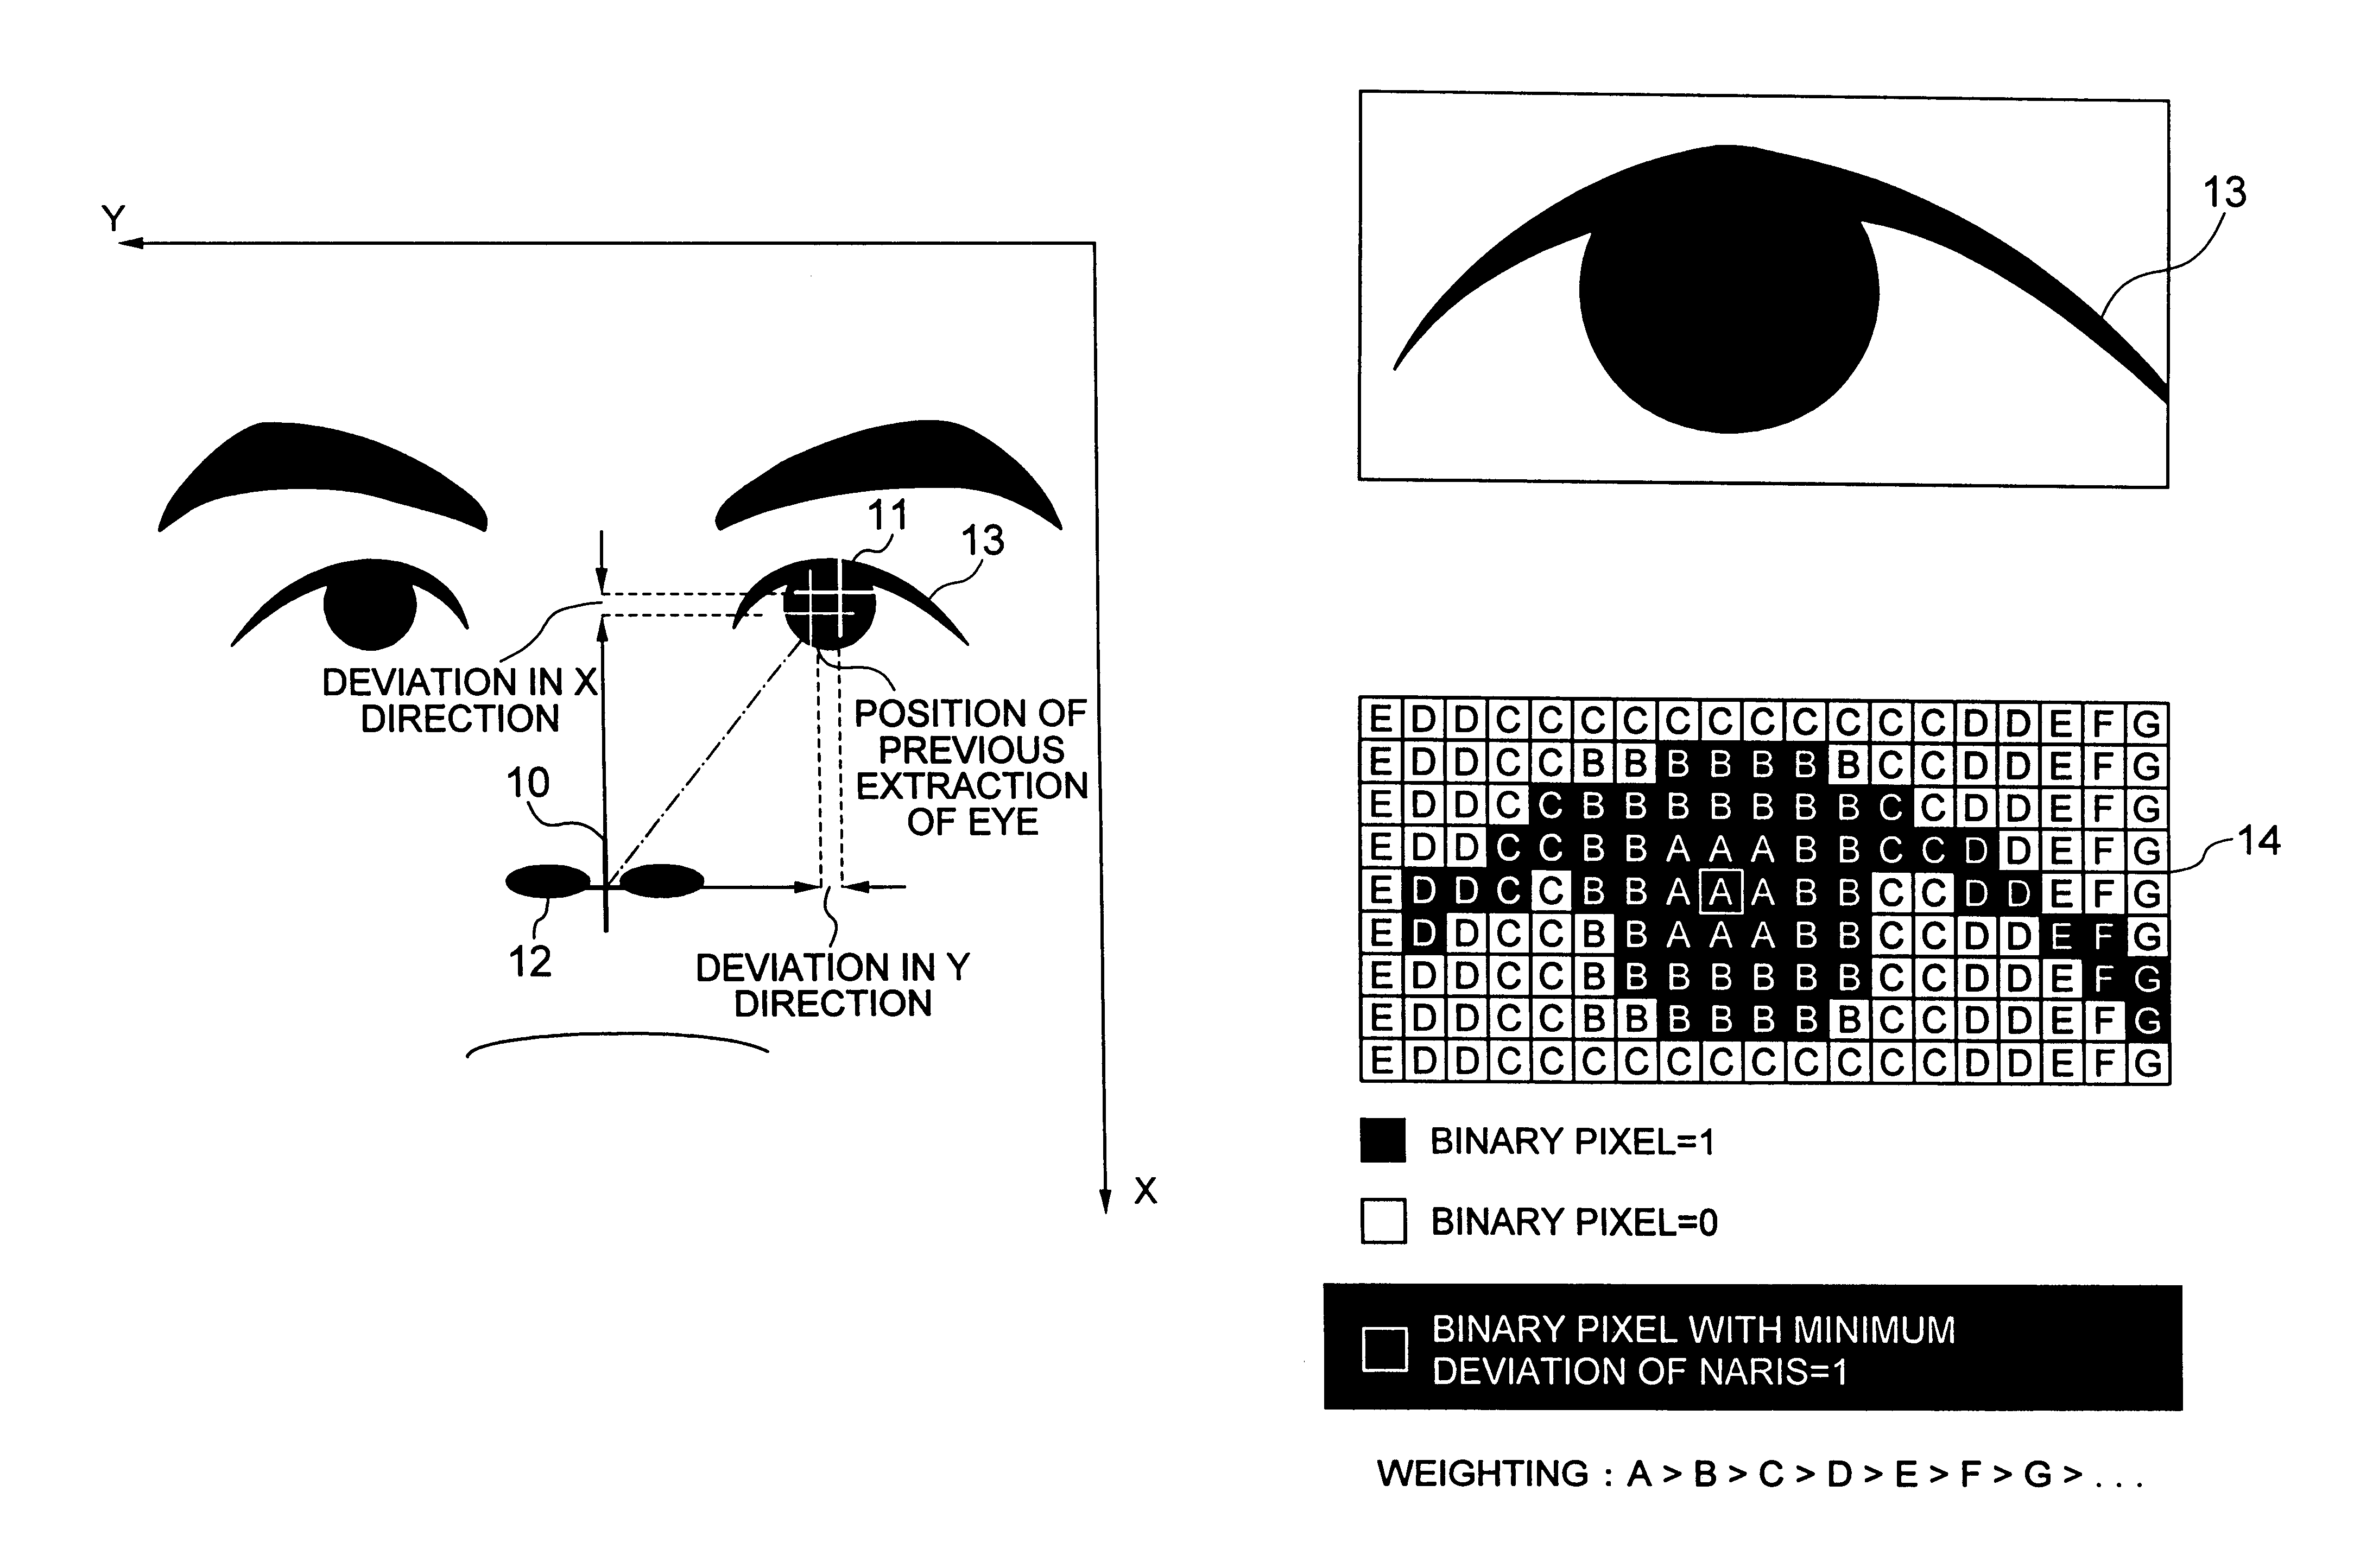 Face image processing apparatus for extraction of an eye image based on the position of the naris